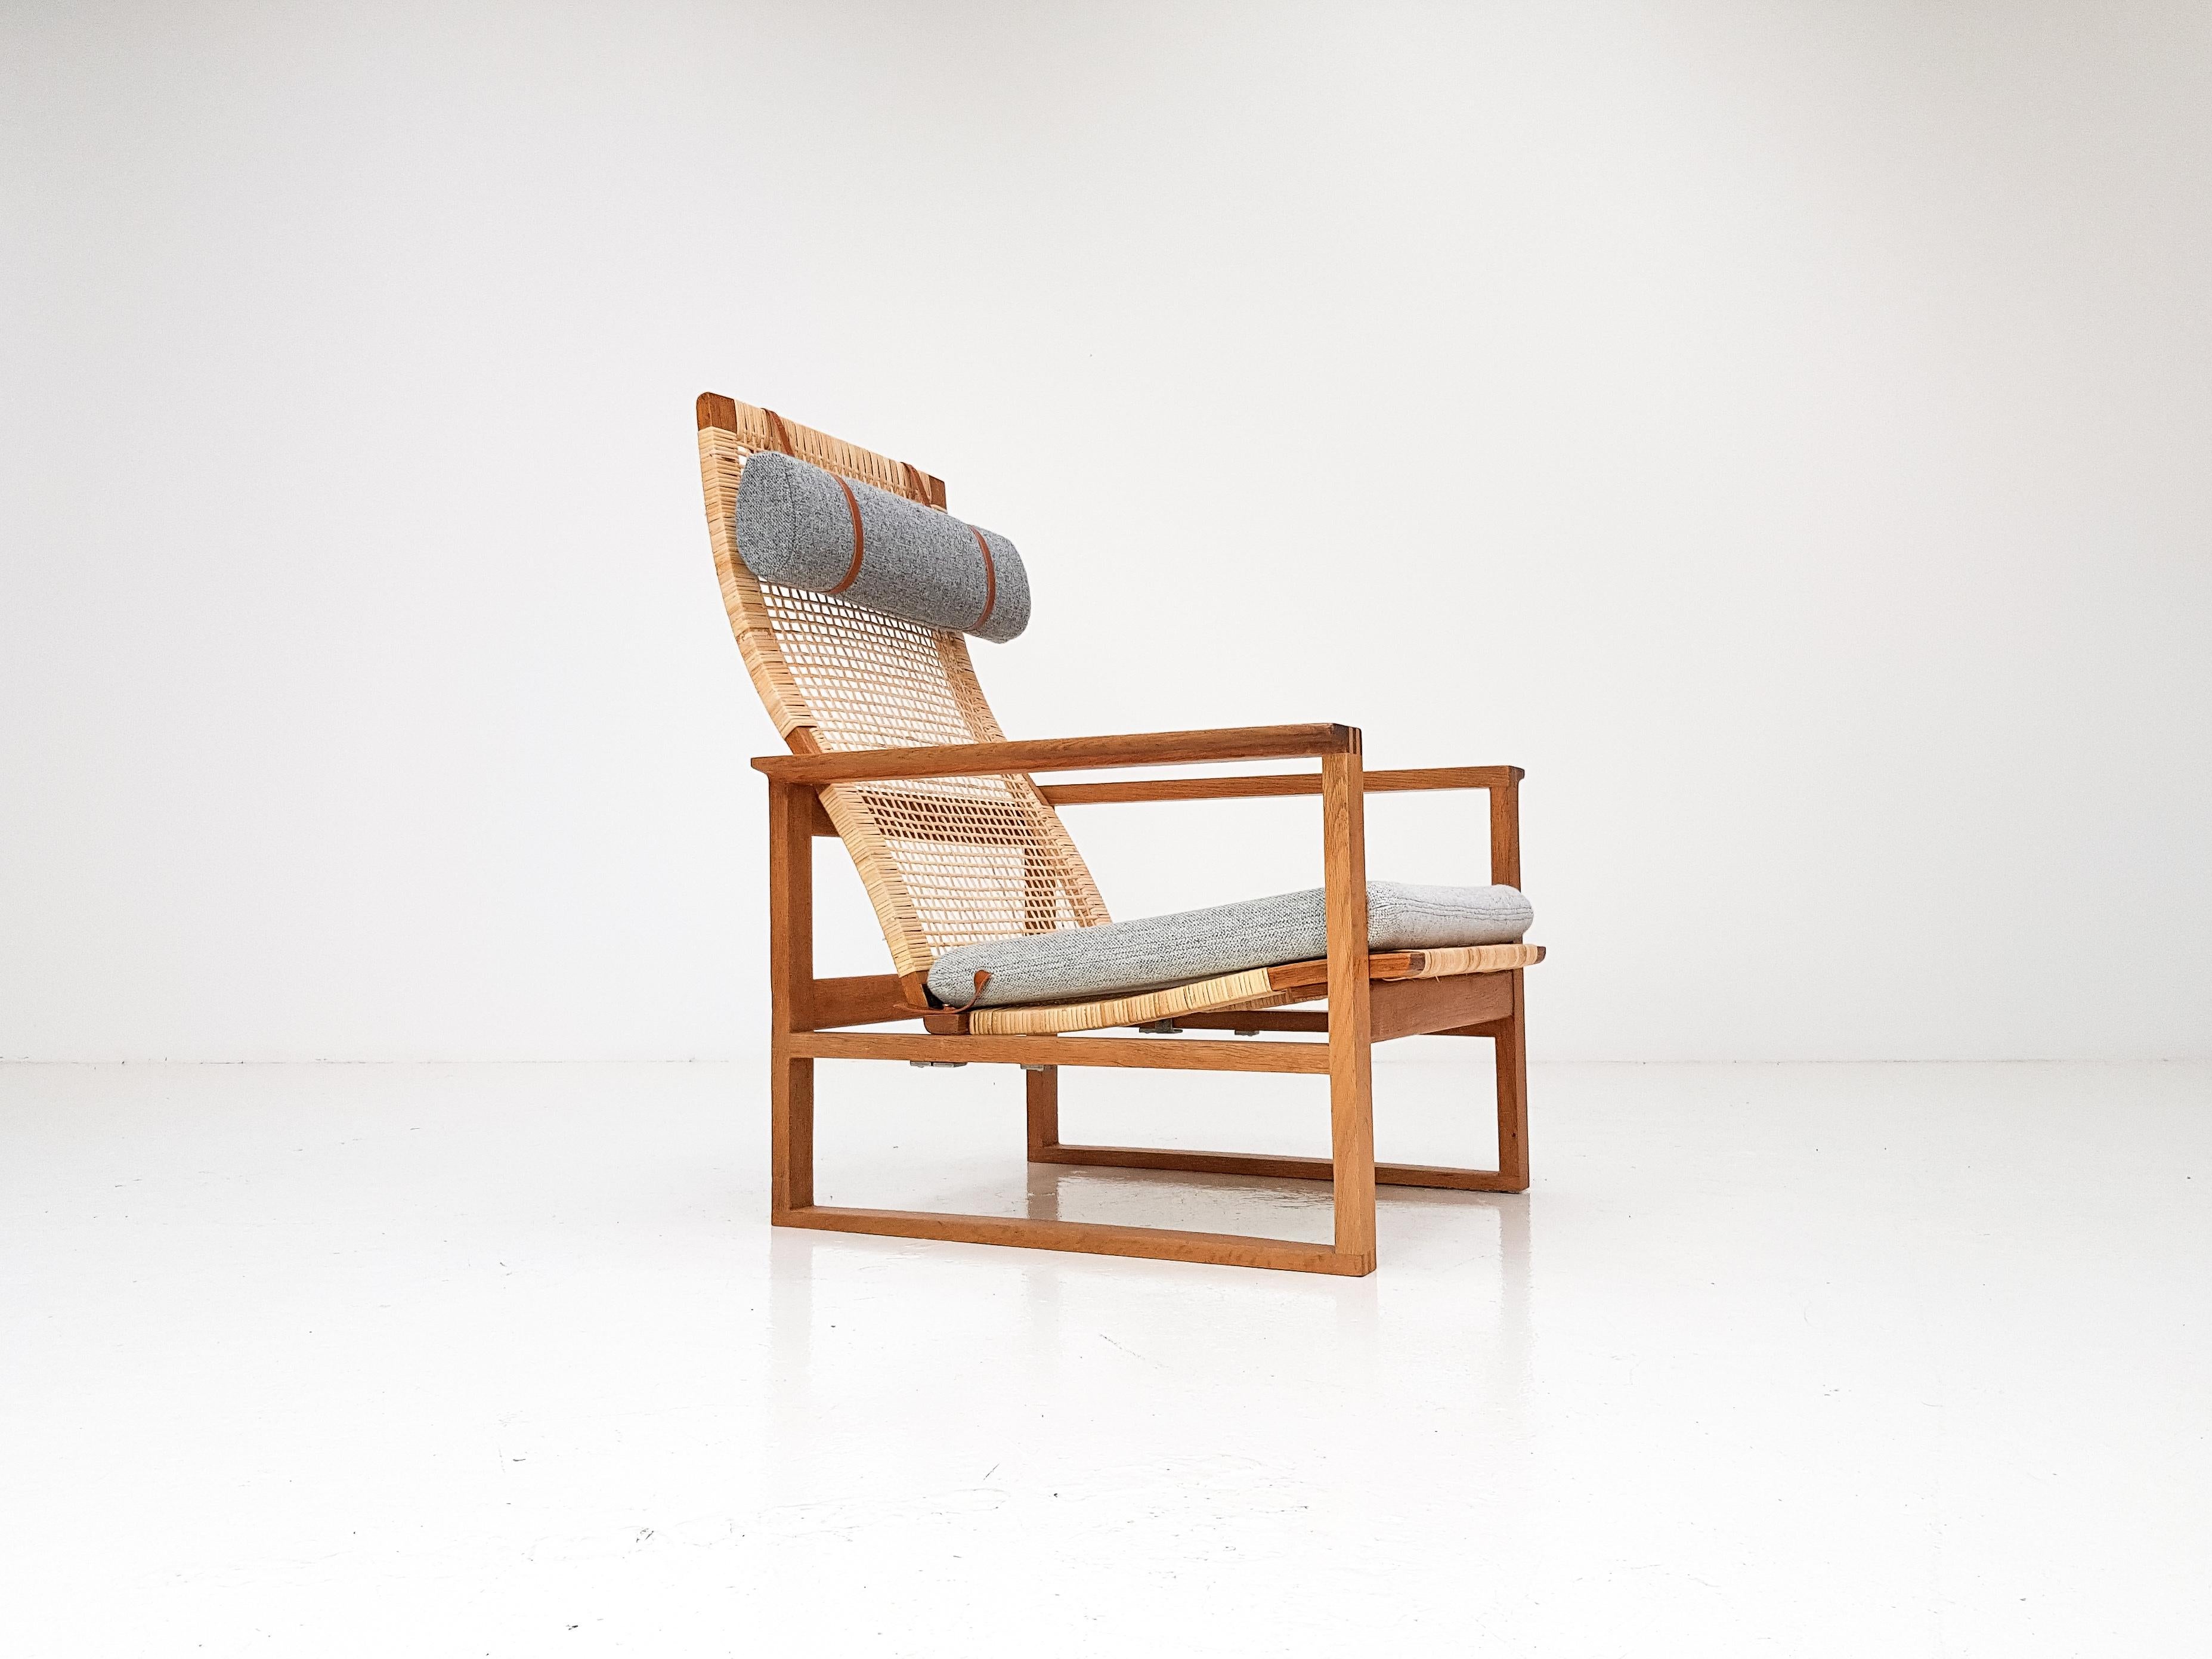 A Børge Mogensen lounge chair designed in 1956 model number 2256 for Fredericia Stolefabrik. Cubical frames made of solid oak with finger joints and cane. This high back model 2254 also reclines.

Newly reupholstered in Kvadrat Hallingdal 65, the